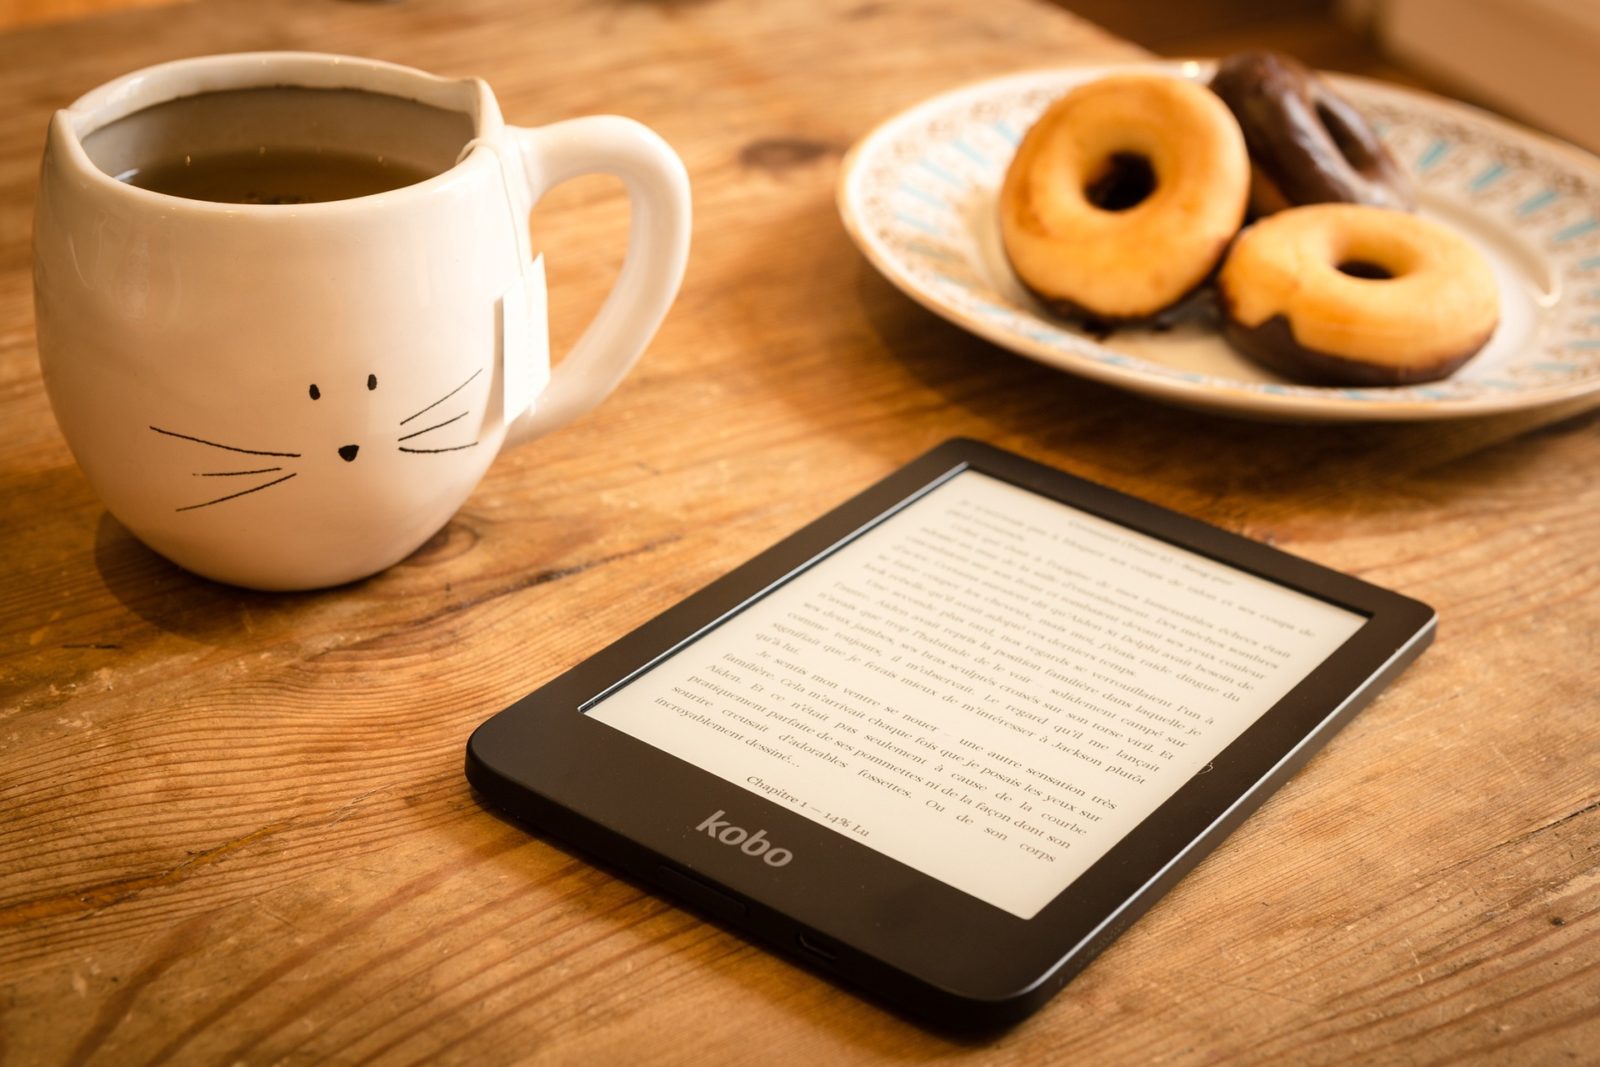 Rustic table featuring a plate of mini doughnuts, a cup of coffee and a e-reader.